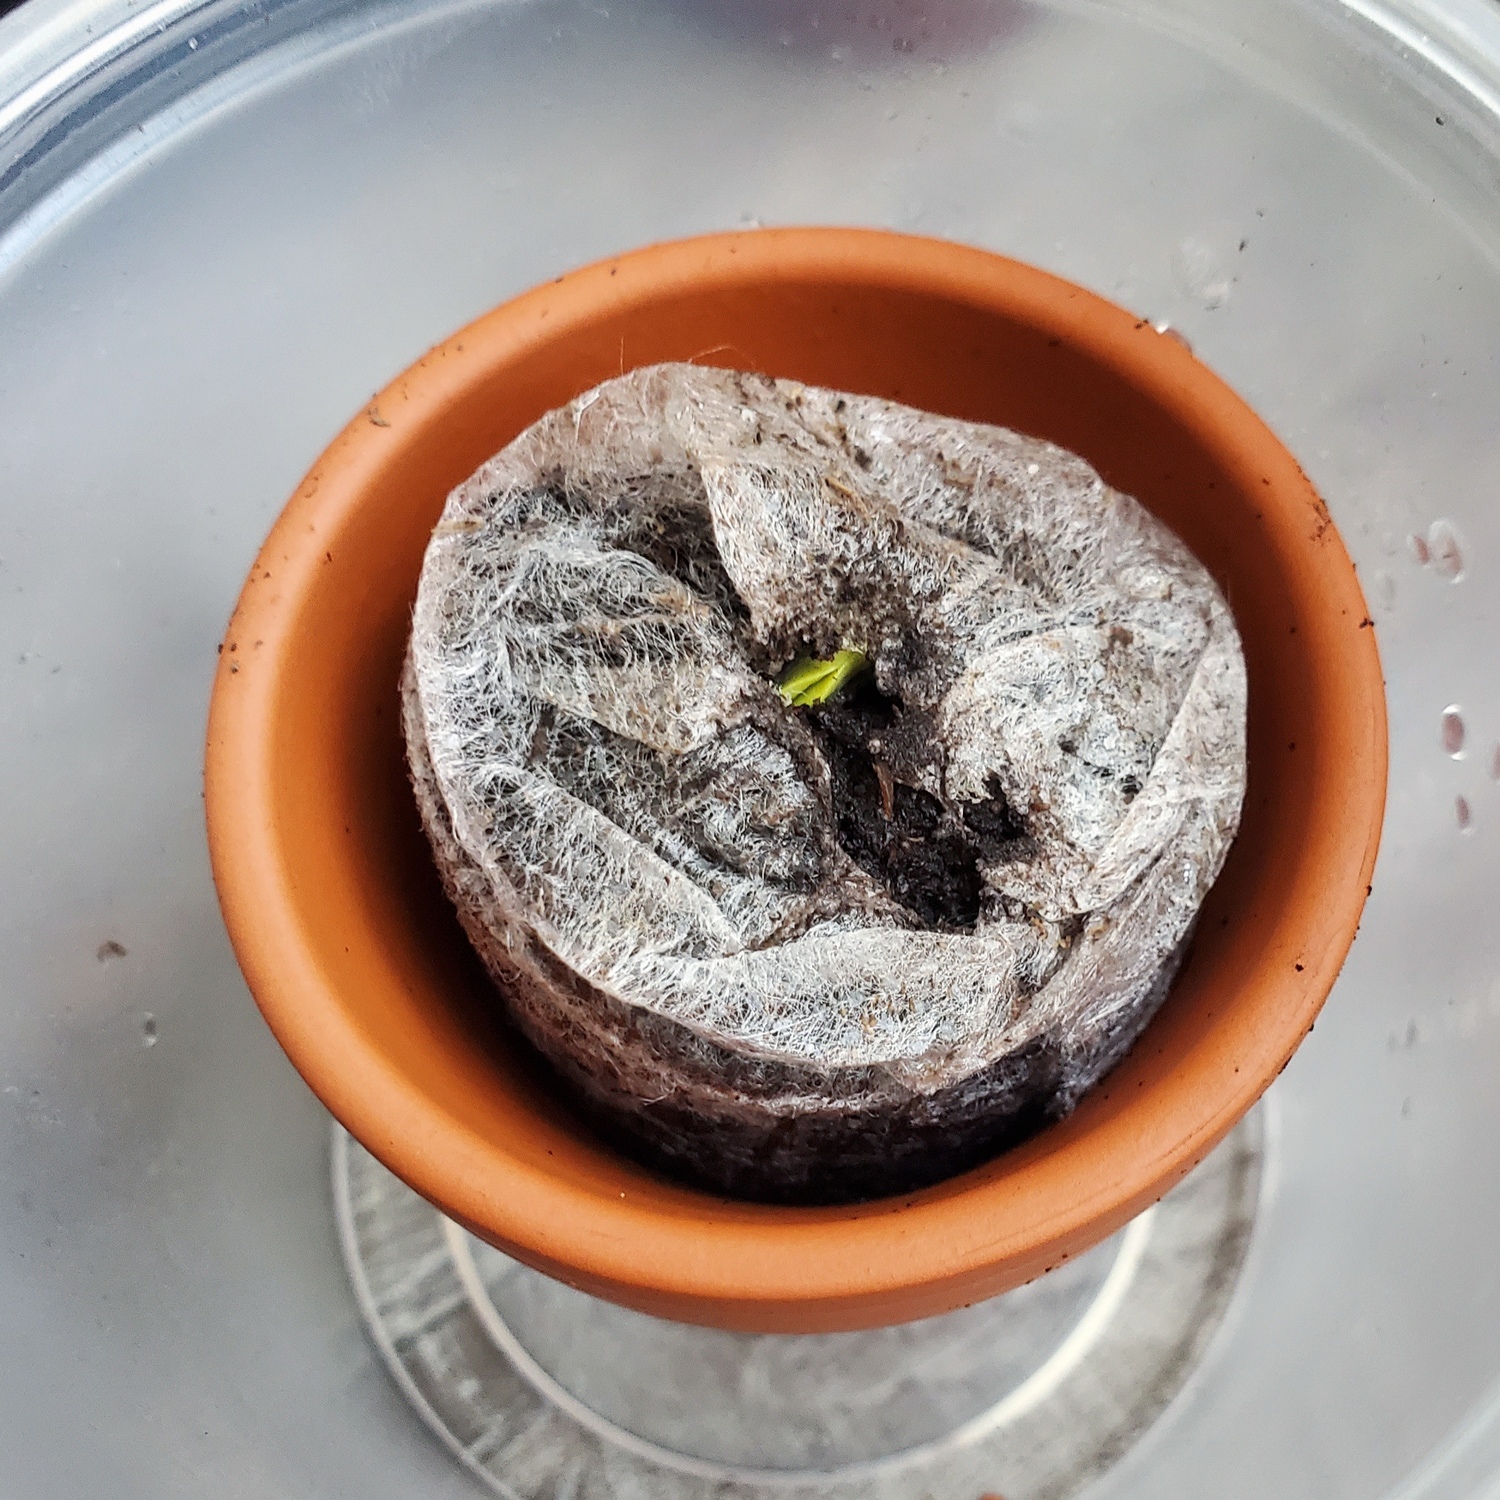 A sunflower seed just starting to open up after a week in a seed starter